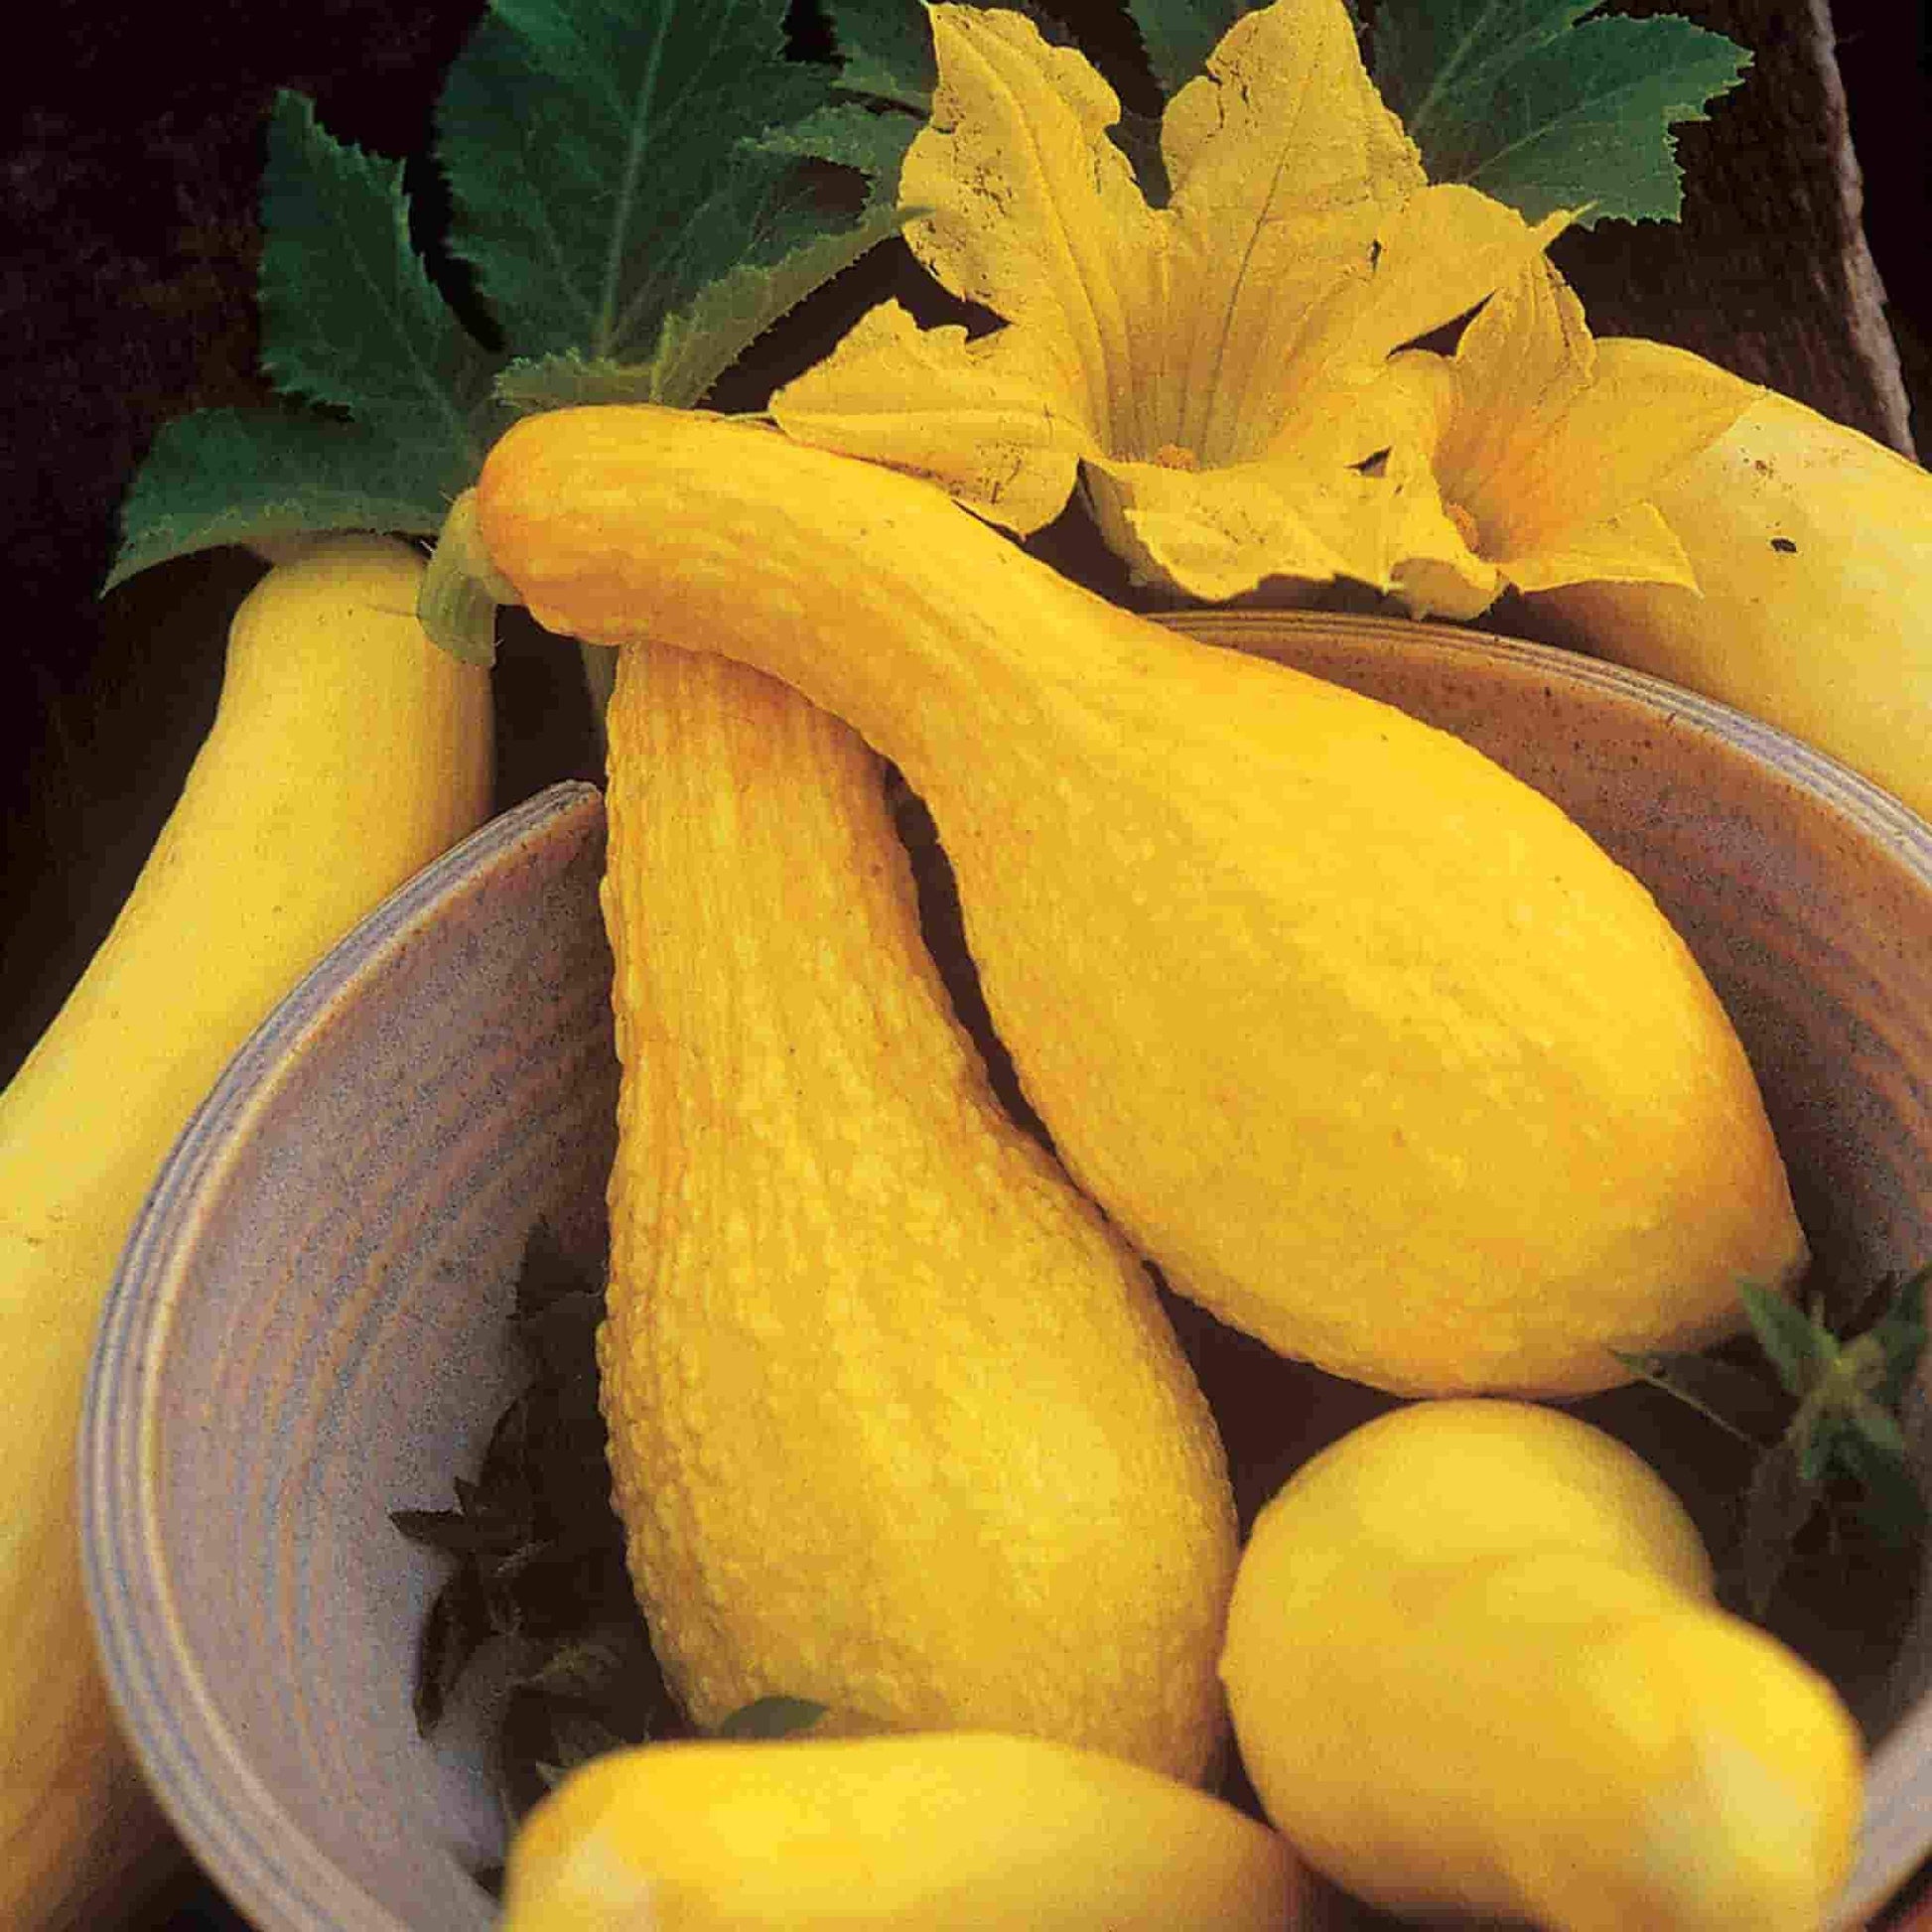 Early Summer Crookneck harvested sitting in a bowl near some squash blooms.